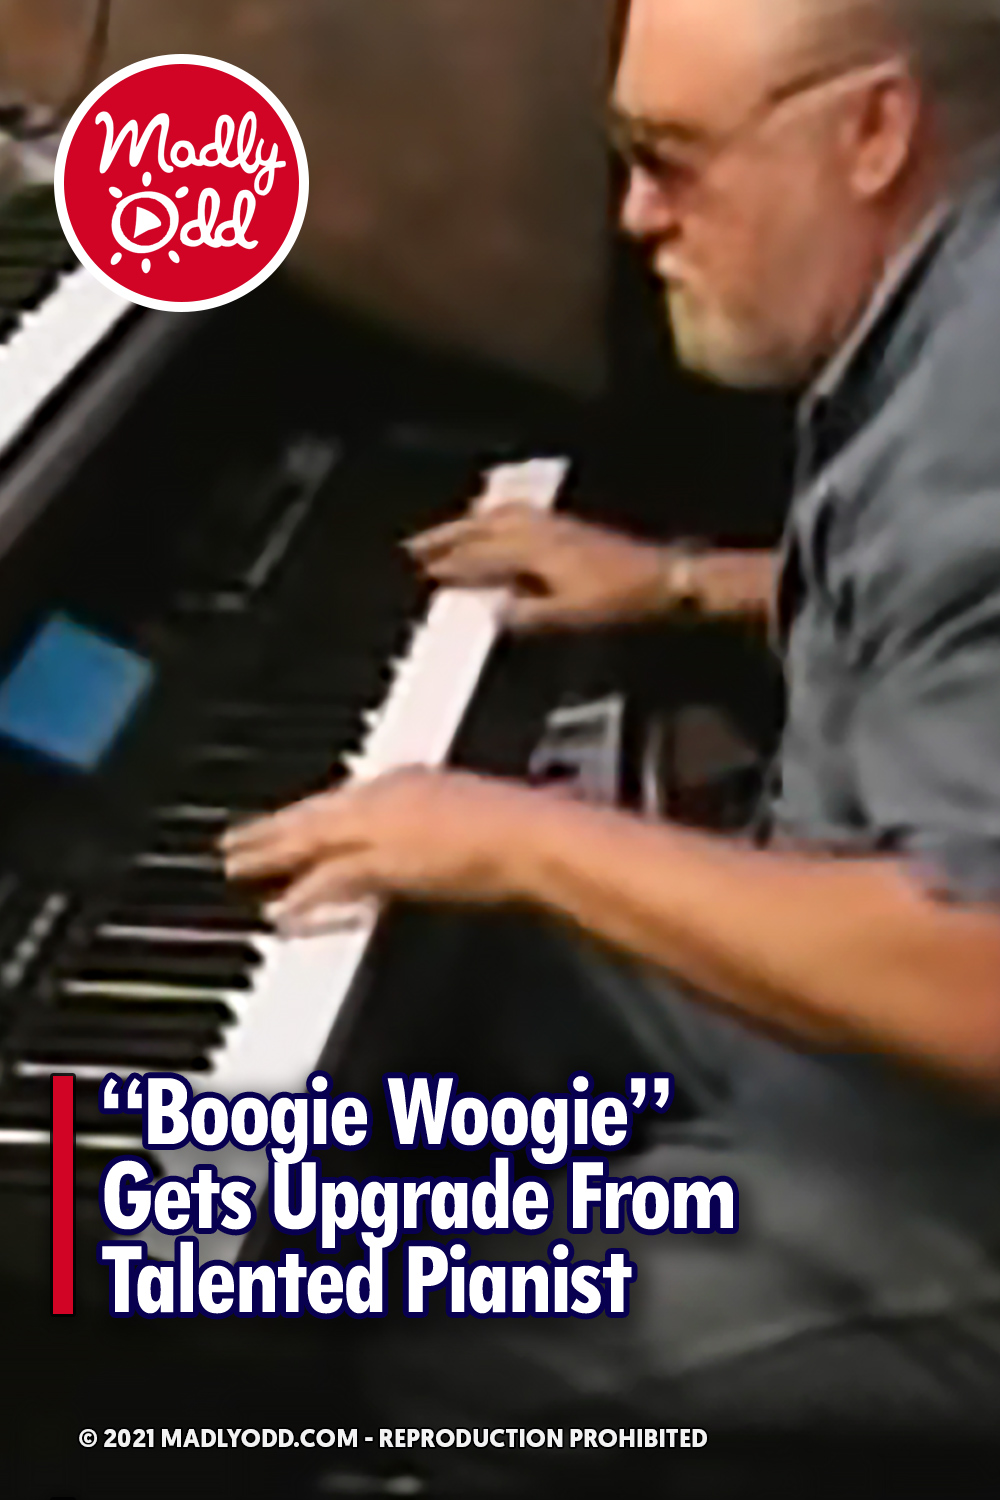 “Boogie Woogie” Gets Upgrade From Talented Pianist